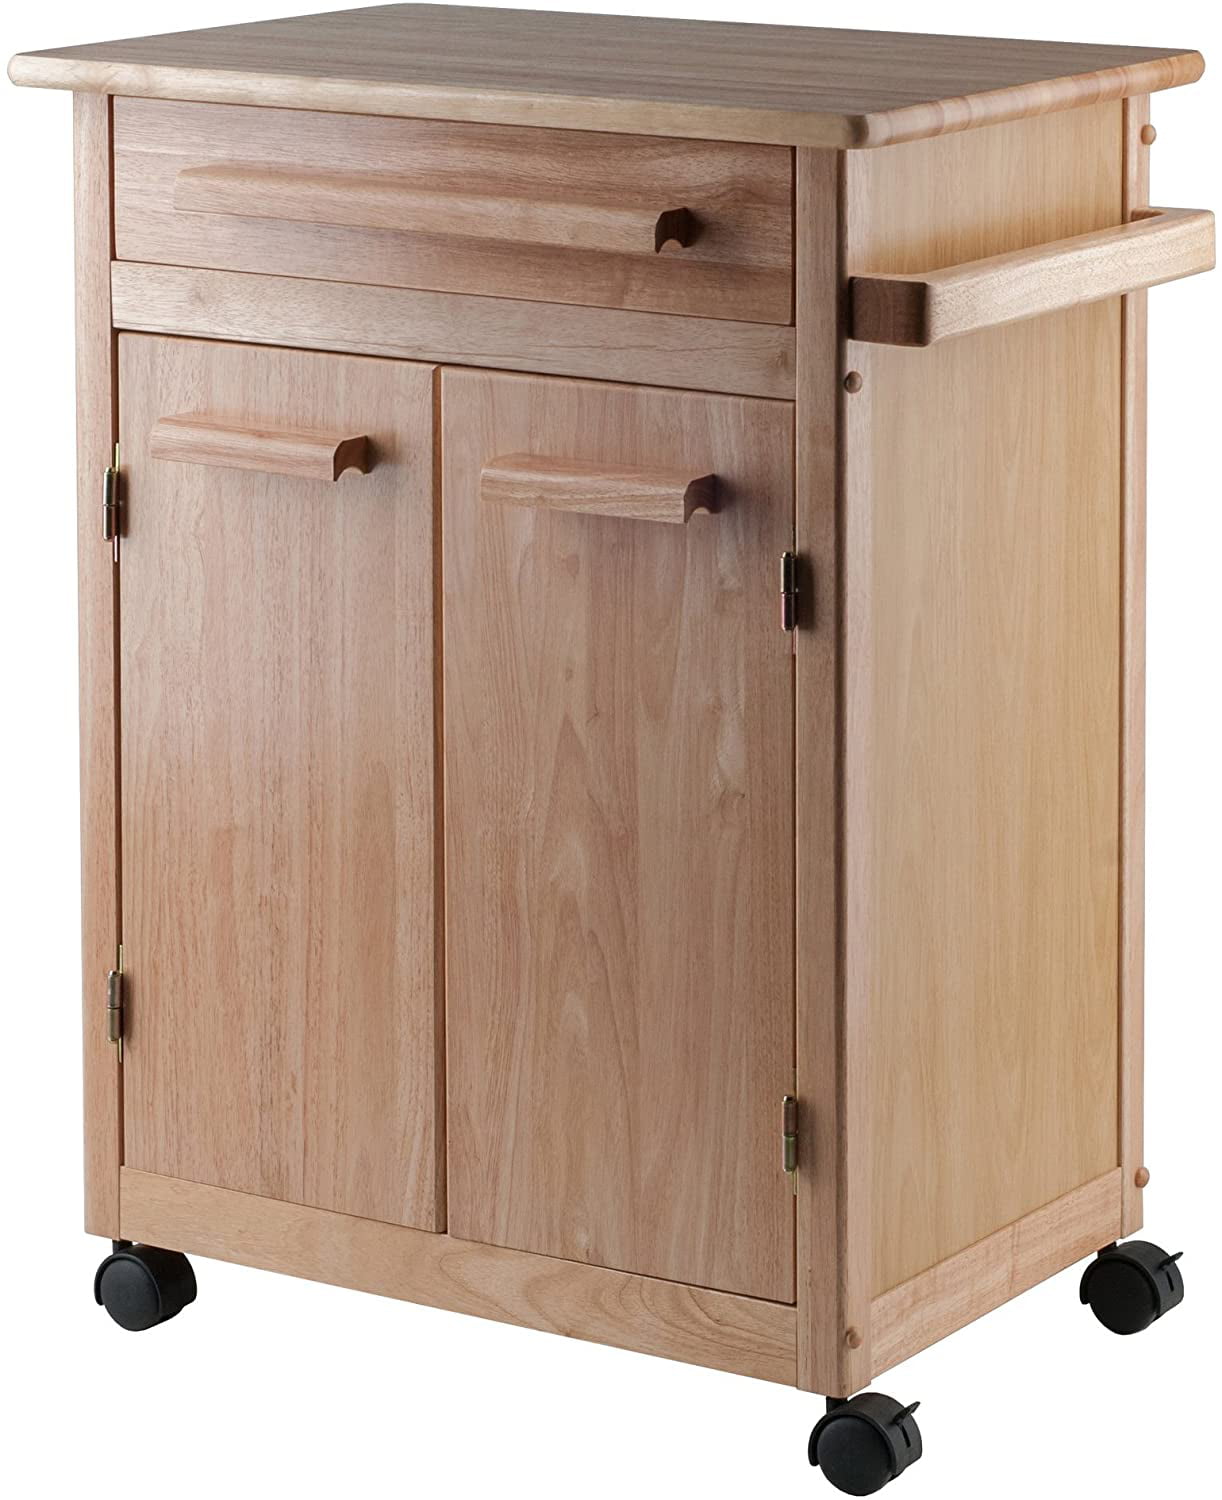 Simple Single Drawer Kitchen Cabinet Storage Cart for Living room